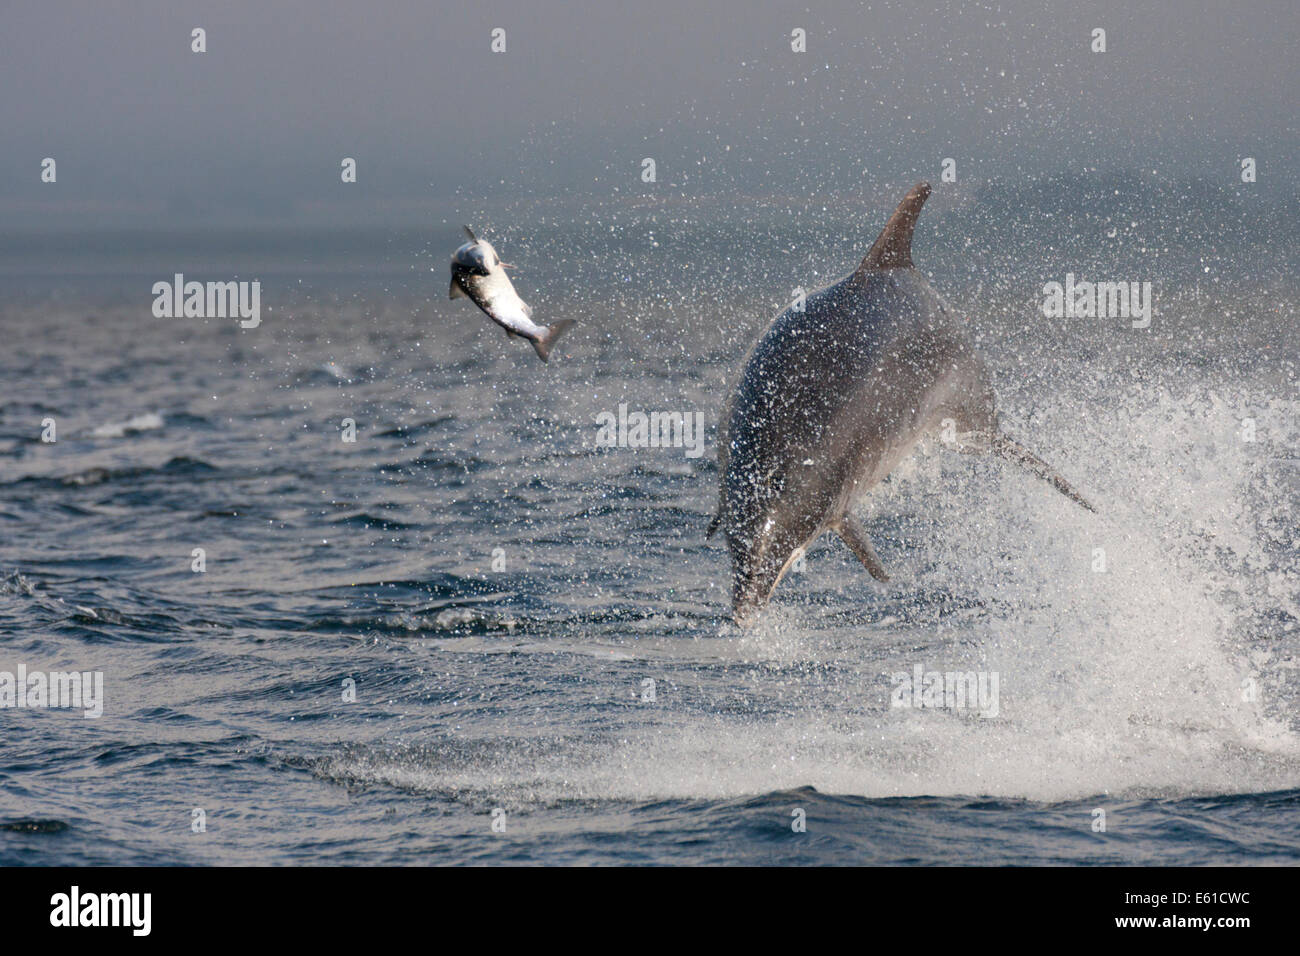 Bottlenose dolphin (Tursiops truncatus) chasing a fish (salmon), Chanonry Point, Moray Firth, Highlands, Scotland UK Stock Photo